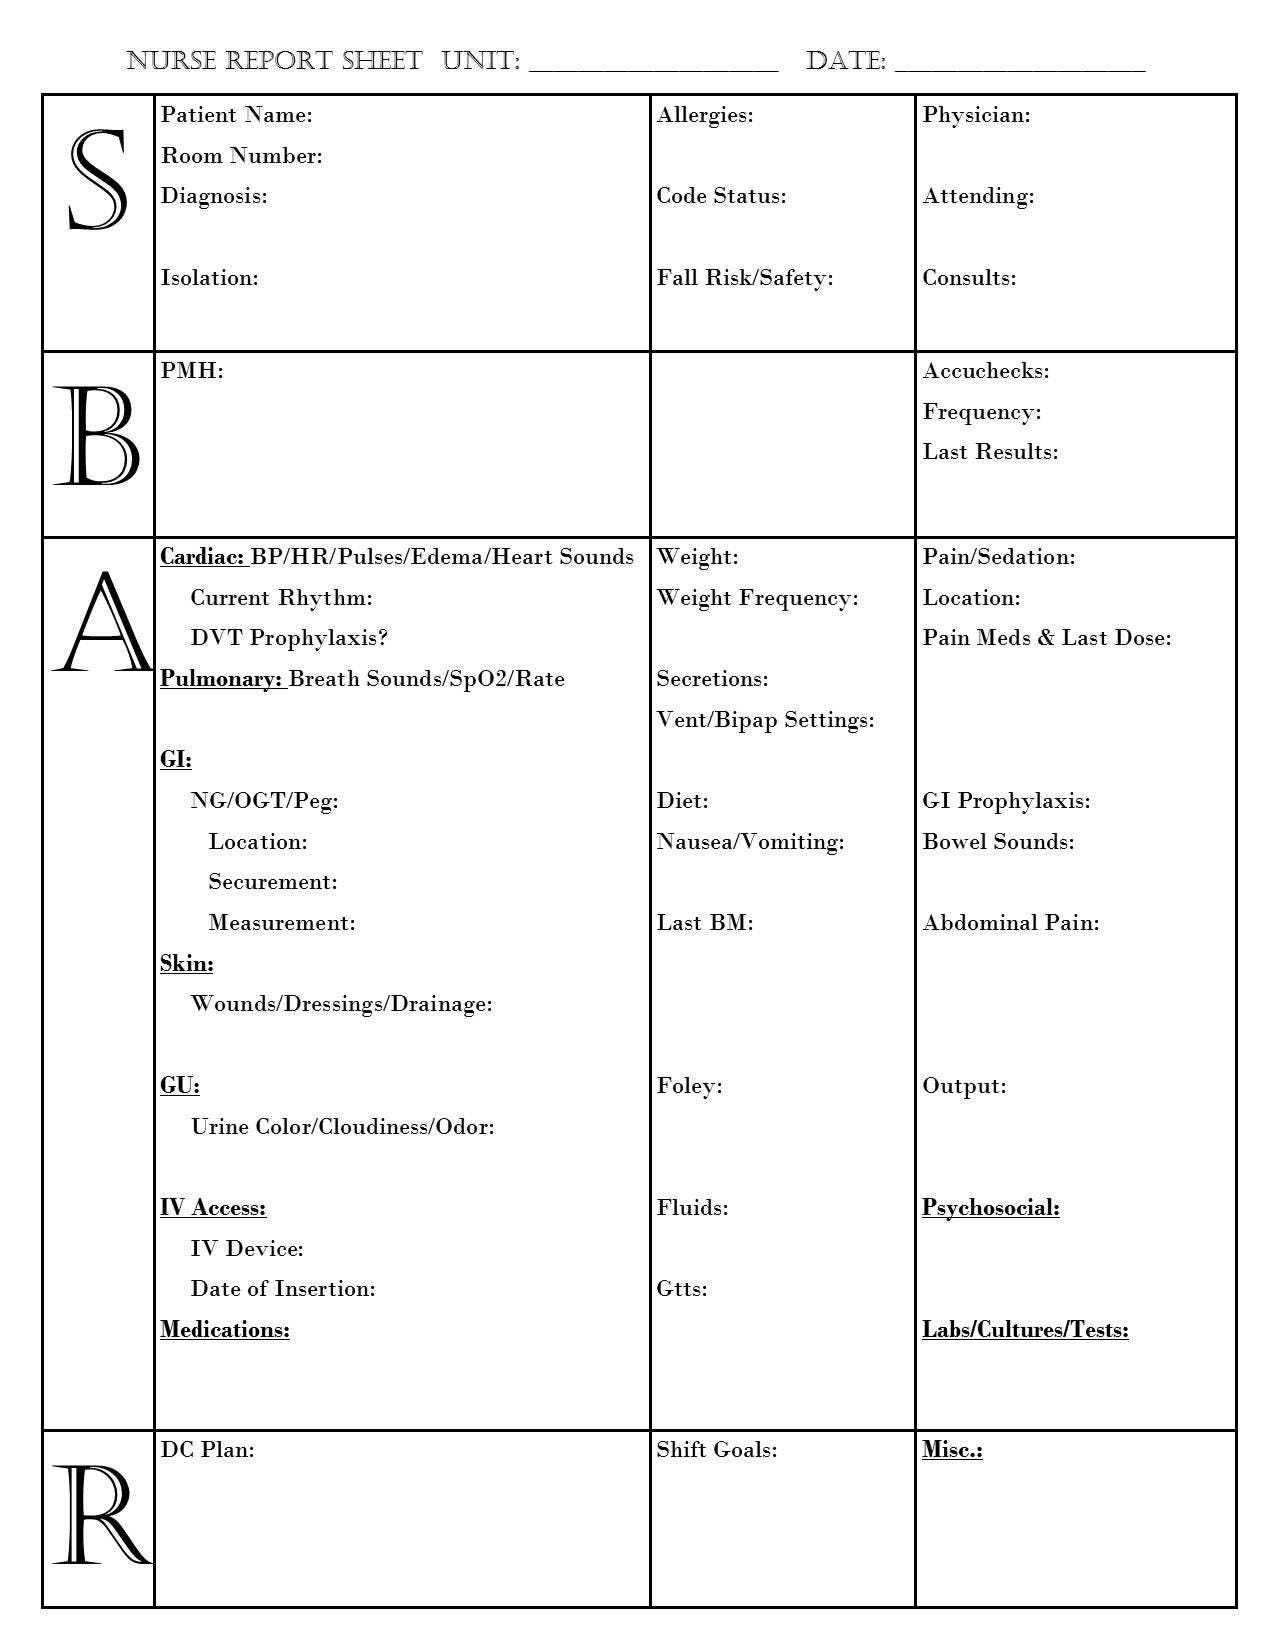 Sbar template free printable With Med Surg Report Sheet Templates